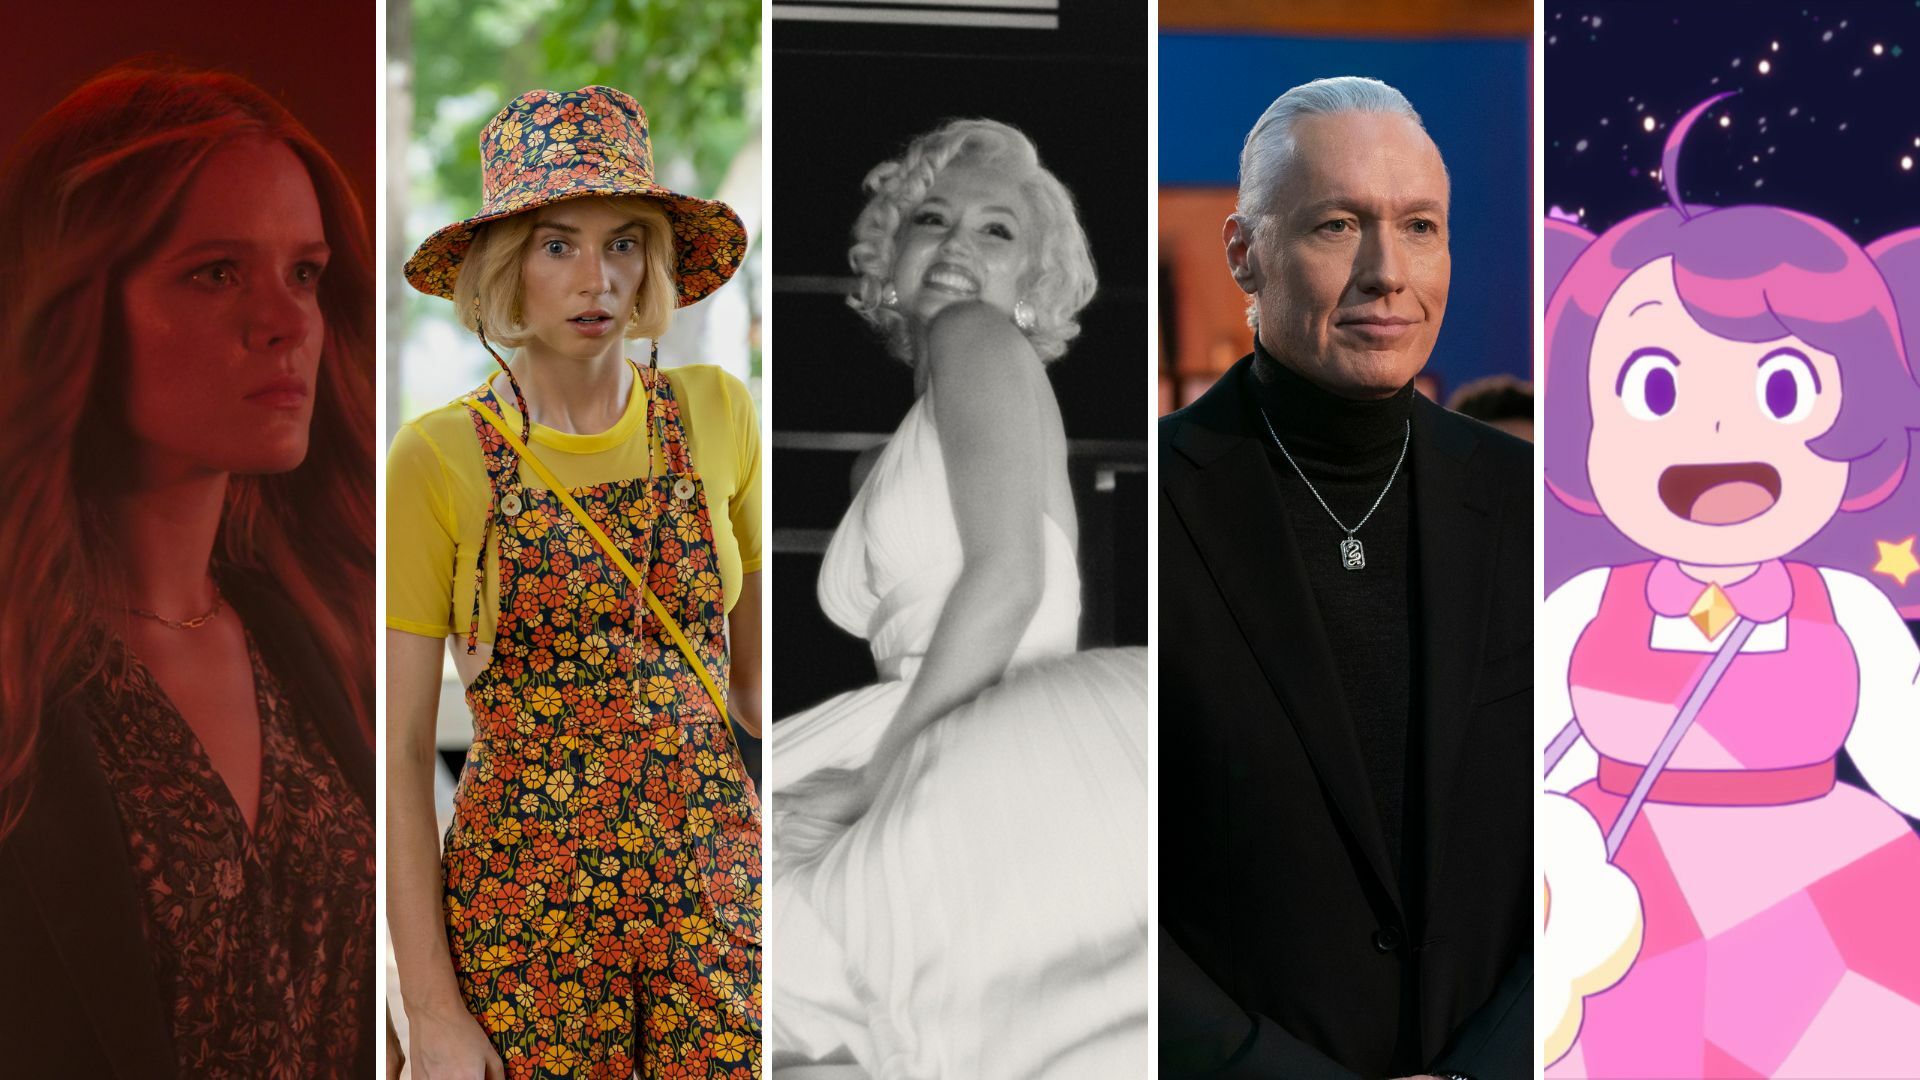 Five panels: a young woman bathed in fiery red light, a young woman in a flowery romper and hat, a smiling blonde woman in a billowing white dress, a man in a black suit with pulled back silver hair, a young girl in a pink dress.